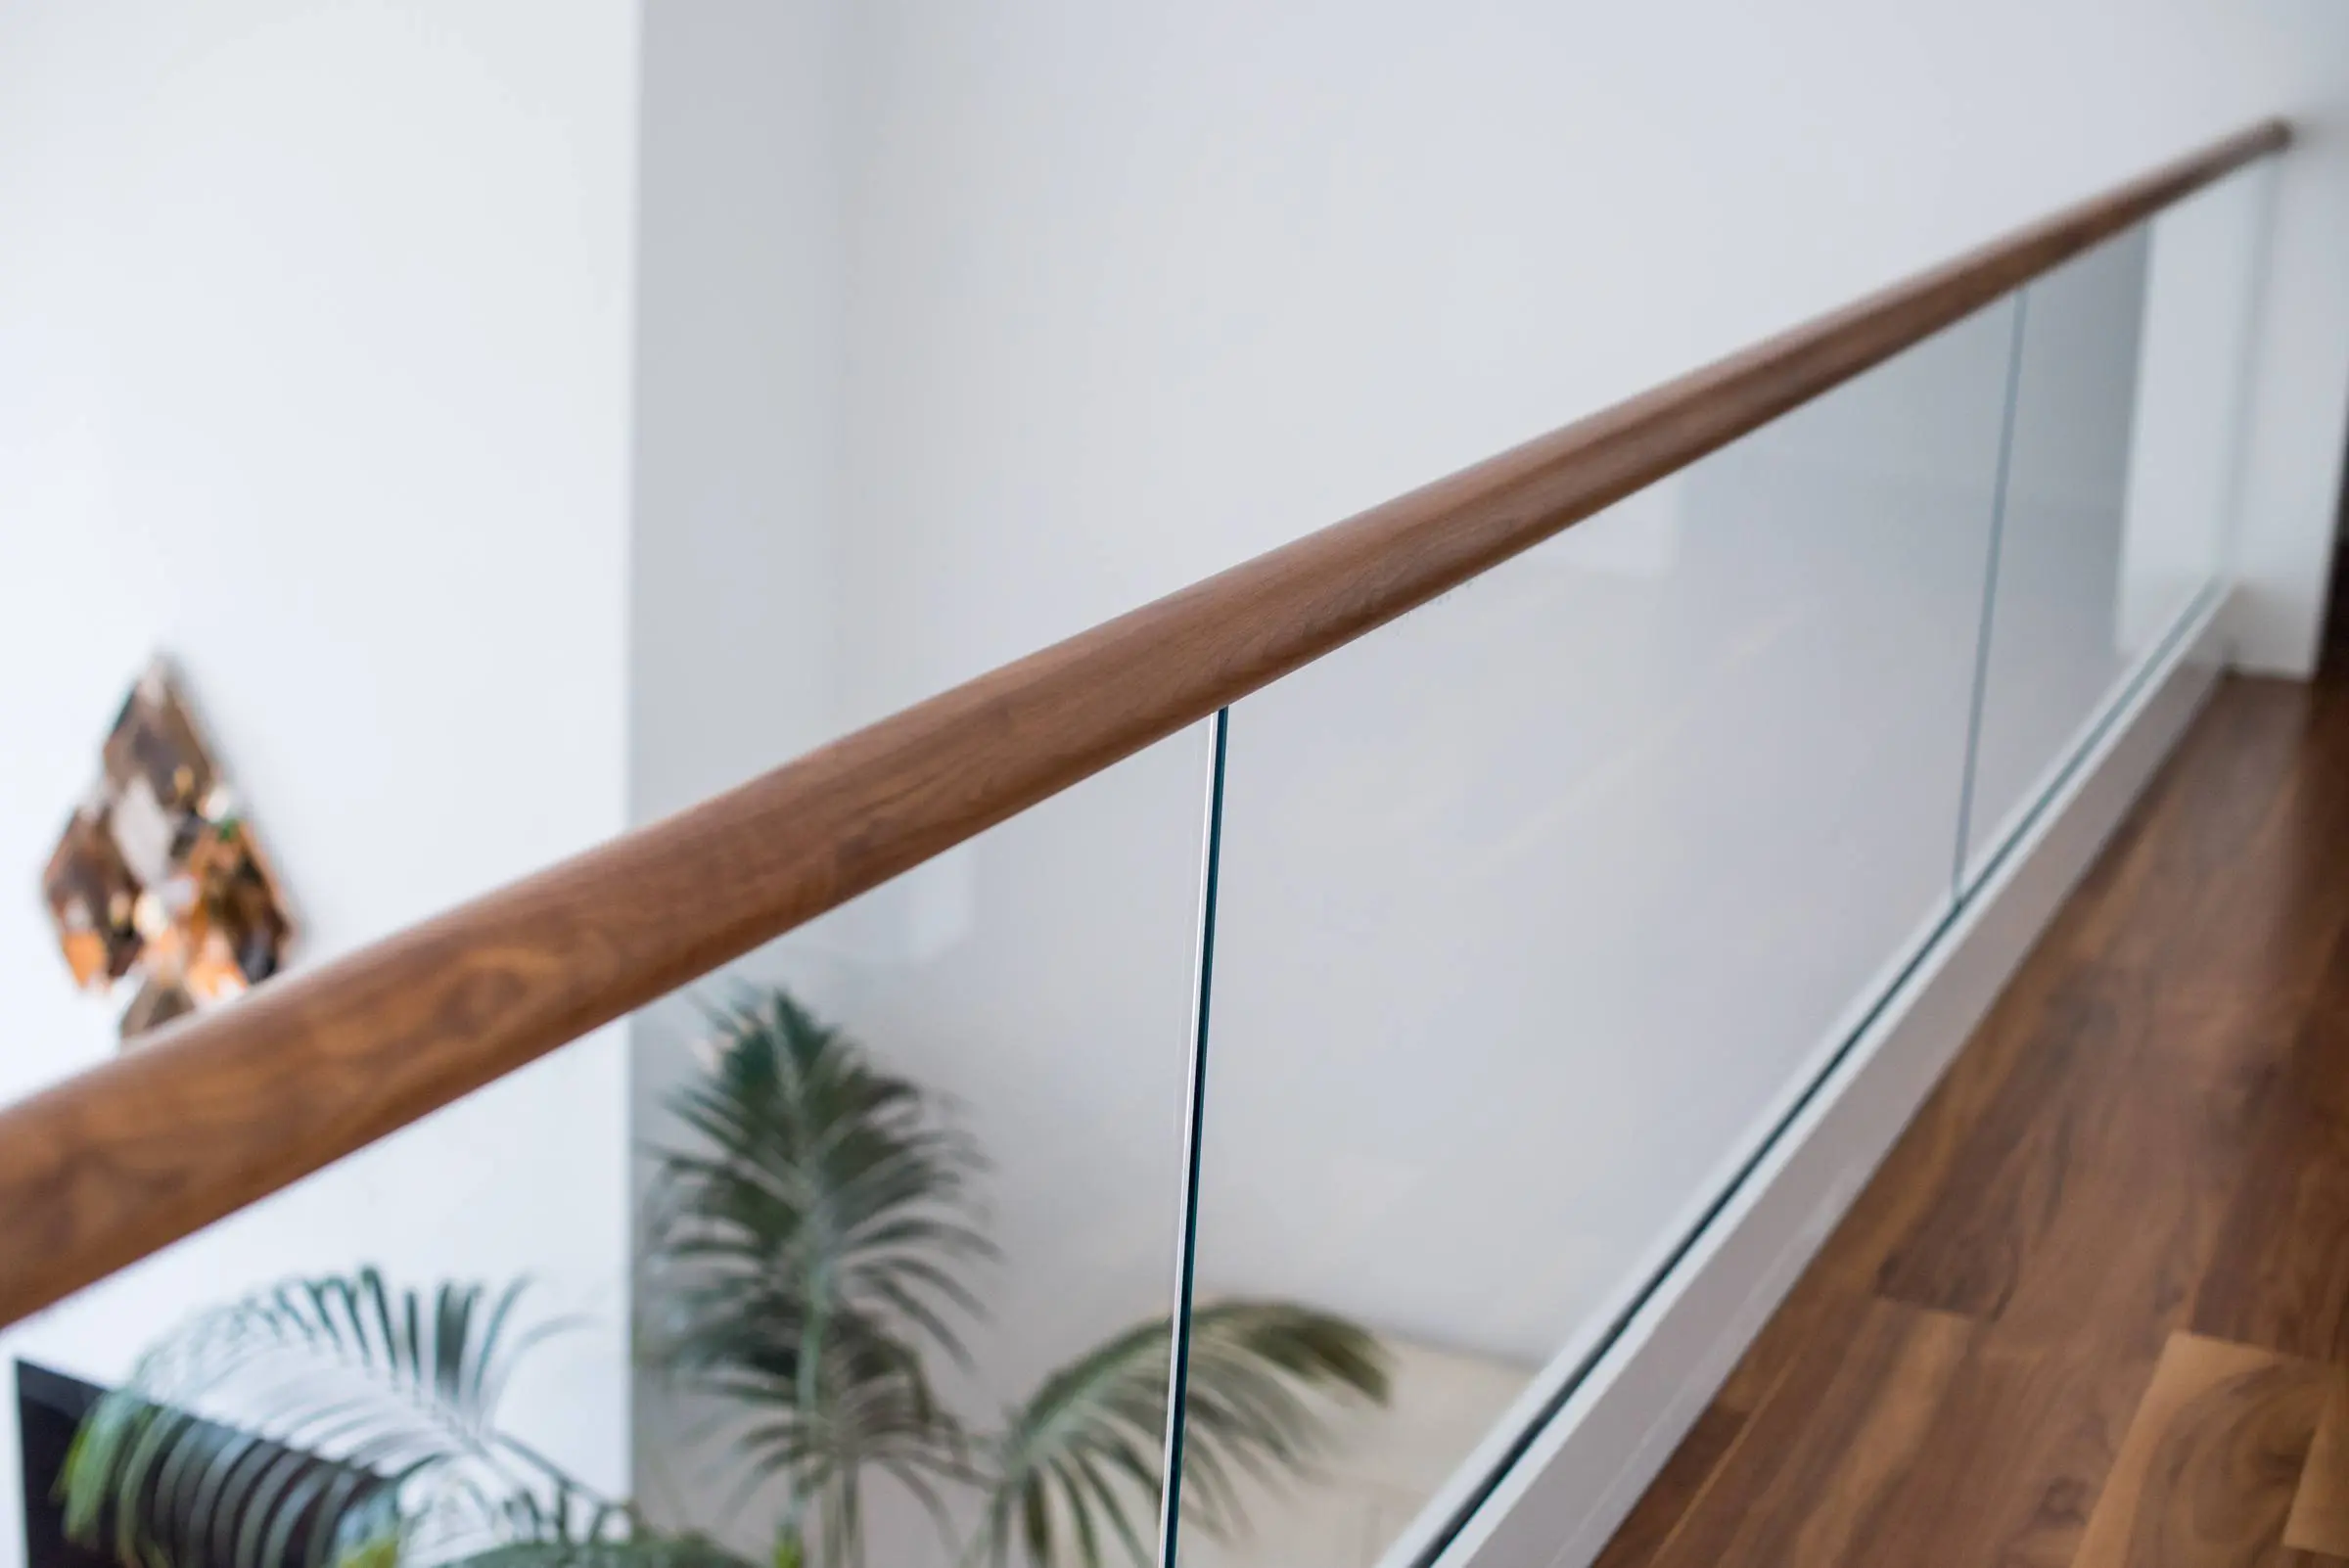 Glass railing for a balcony area with wood accent hand rails.